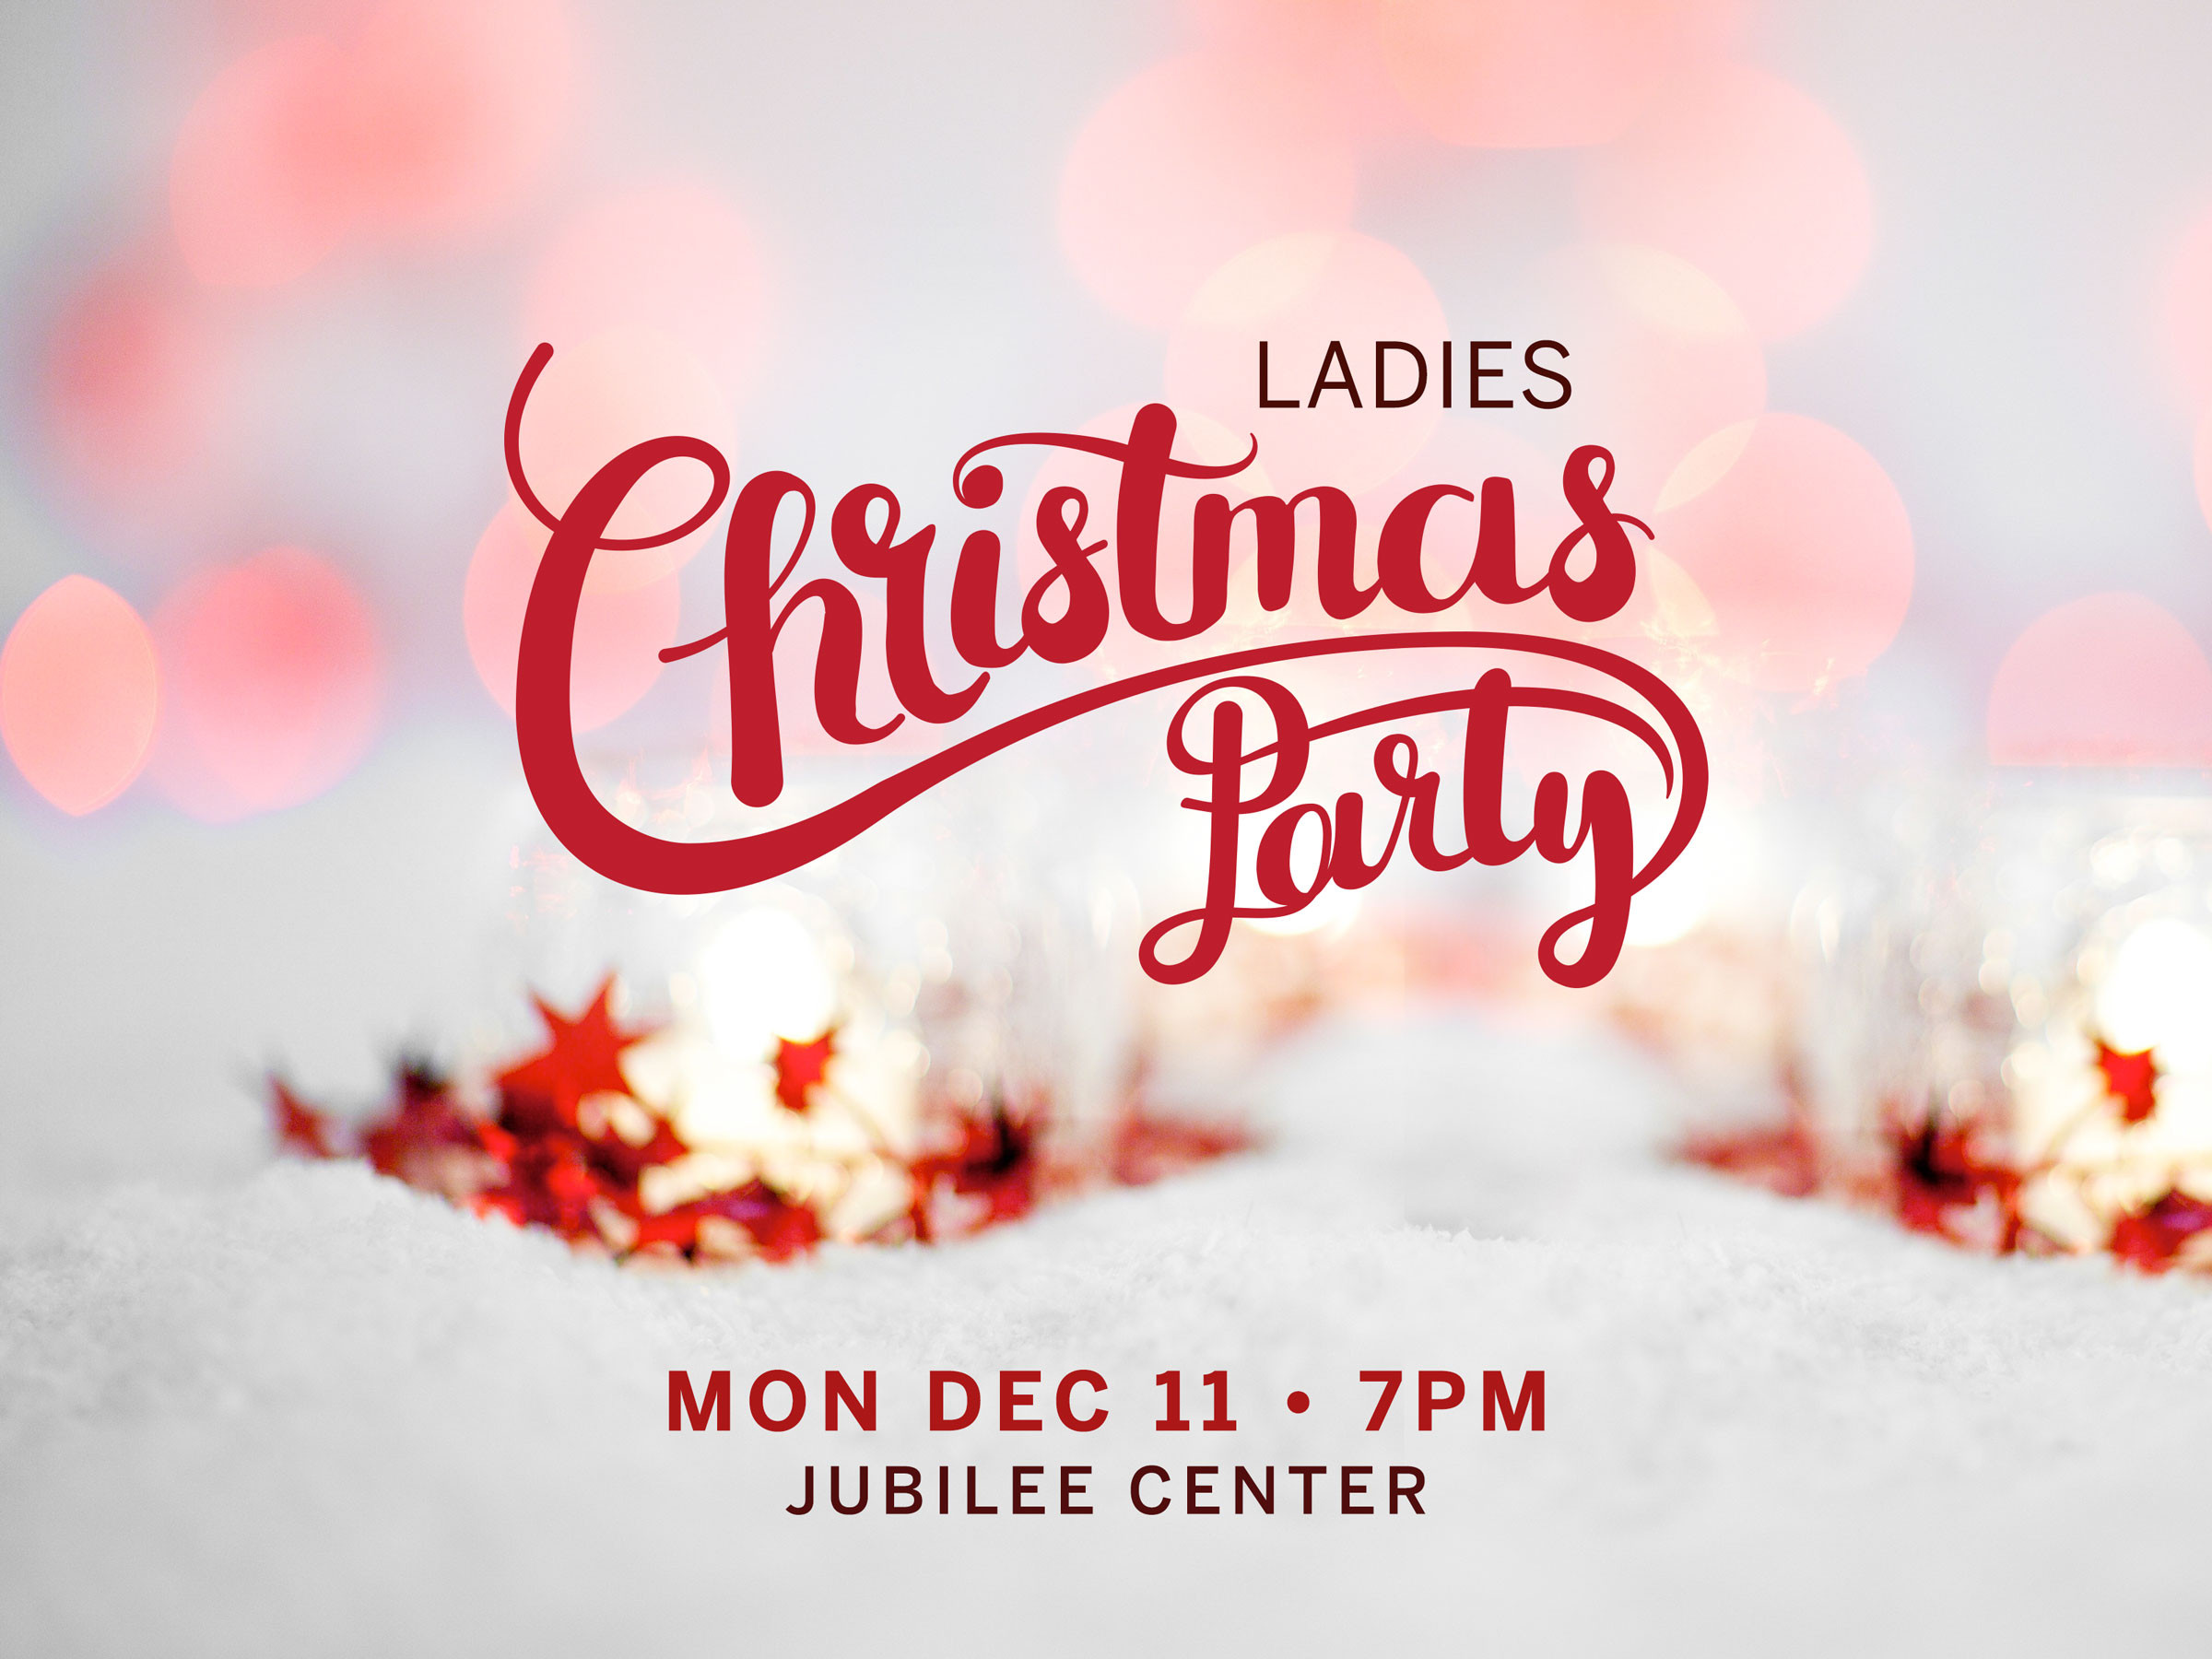 Ladies Christmas Party Ideas
 La s Christmas Party Jubilee Church